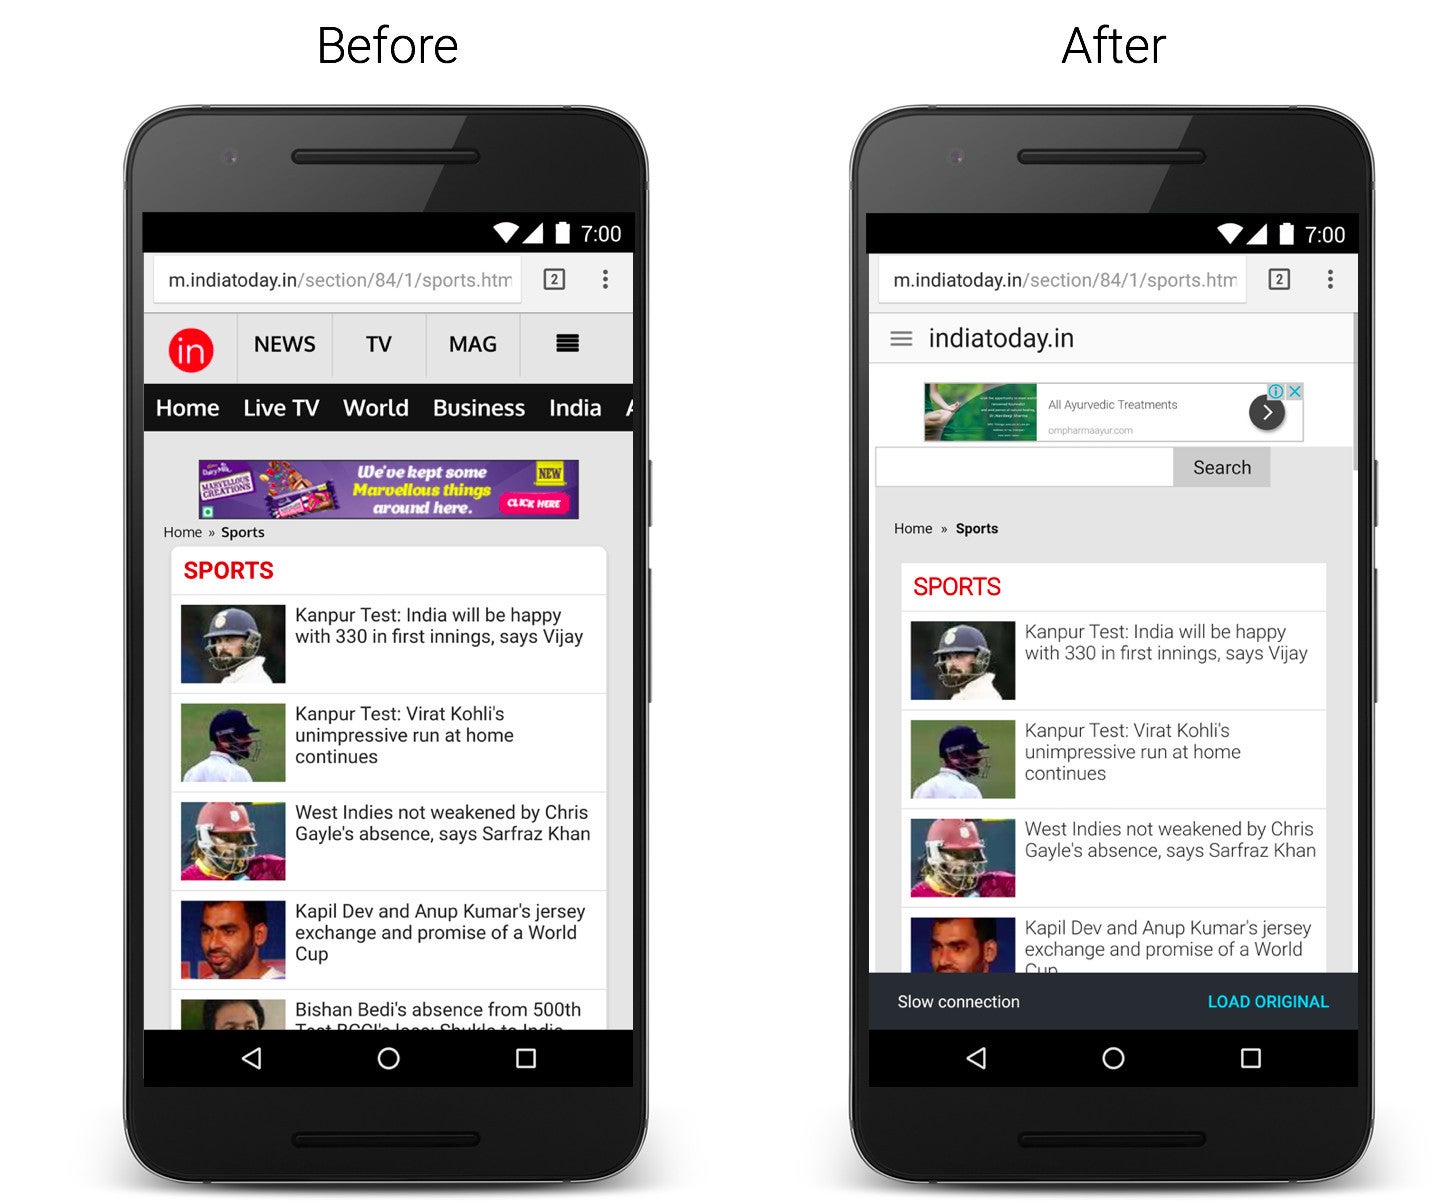 Chrome for Android gets new download feature, compression technology for videos